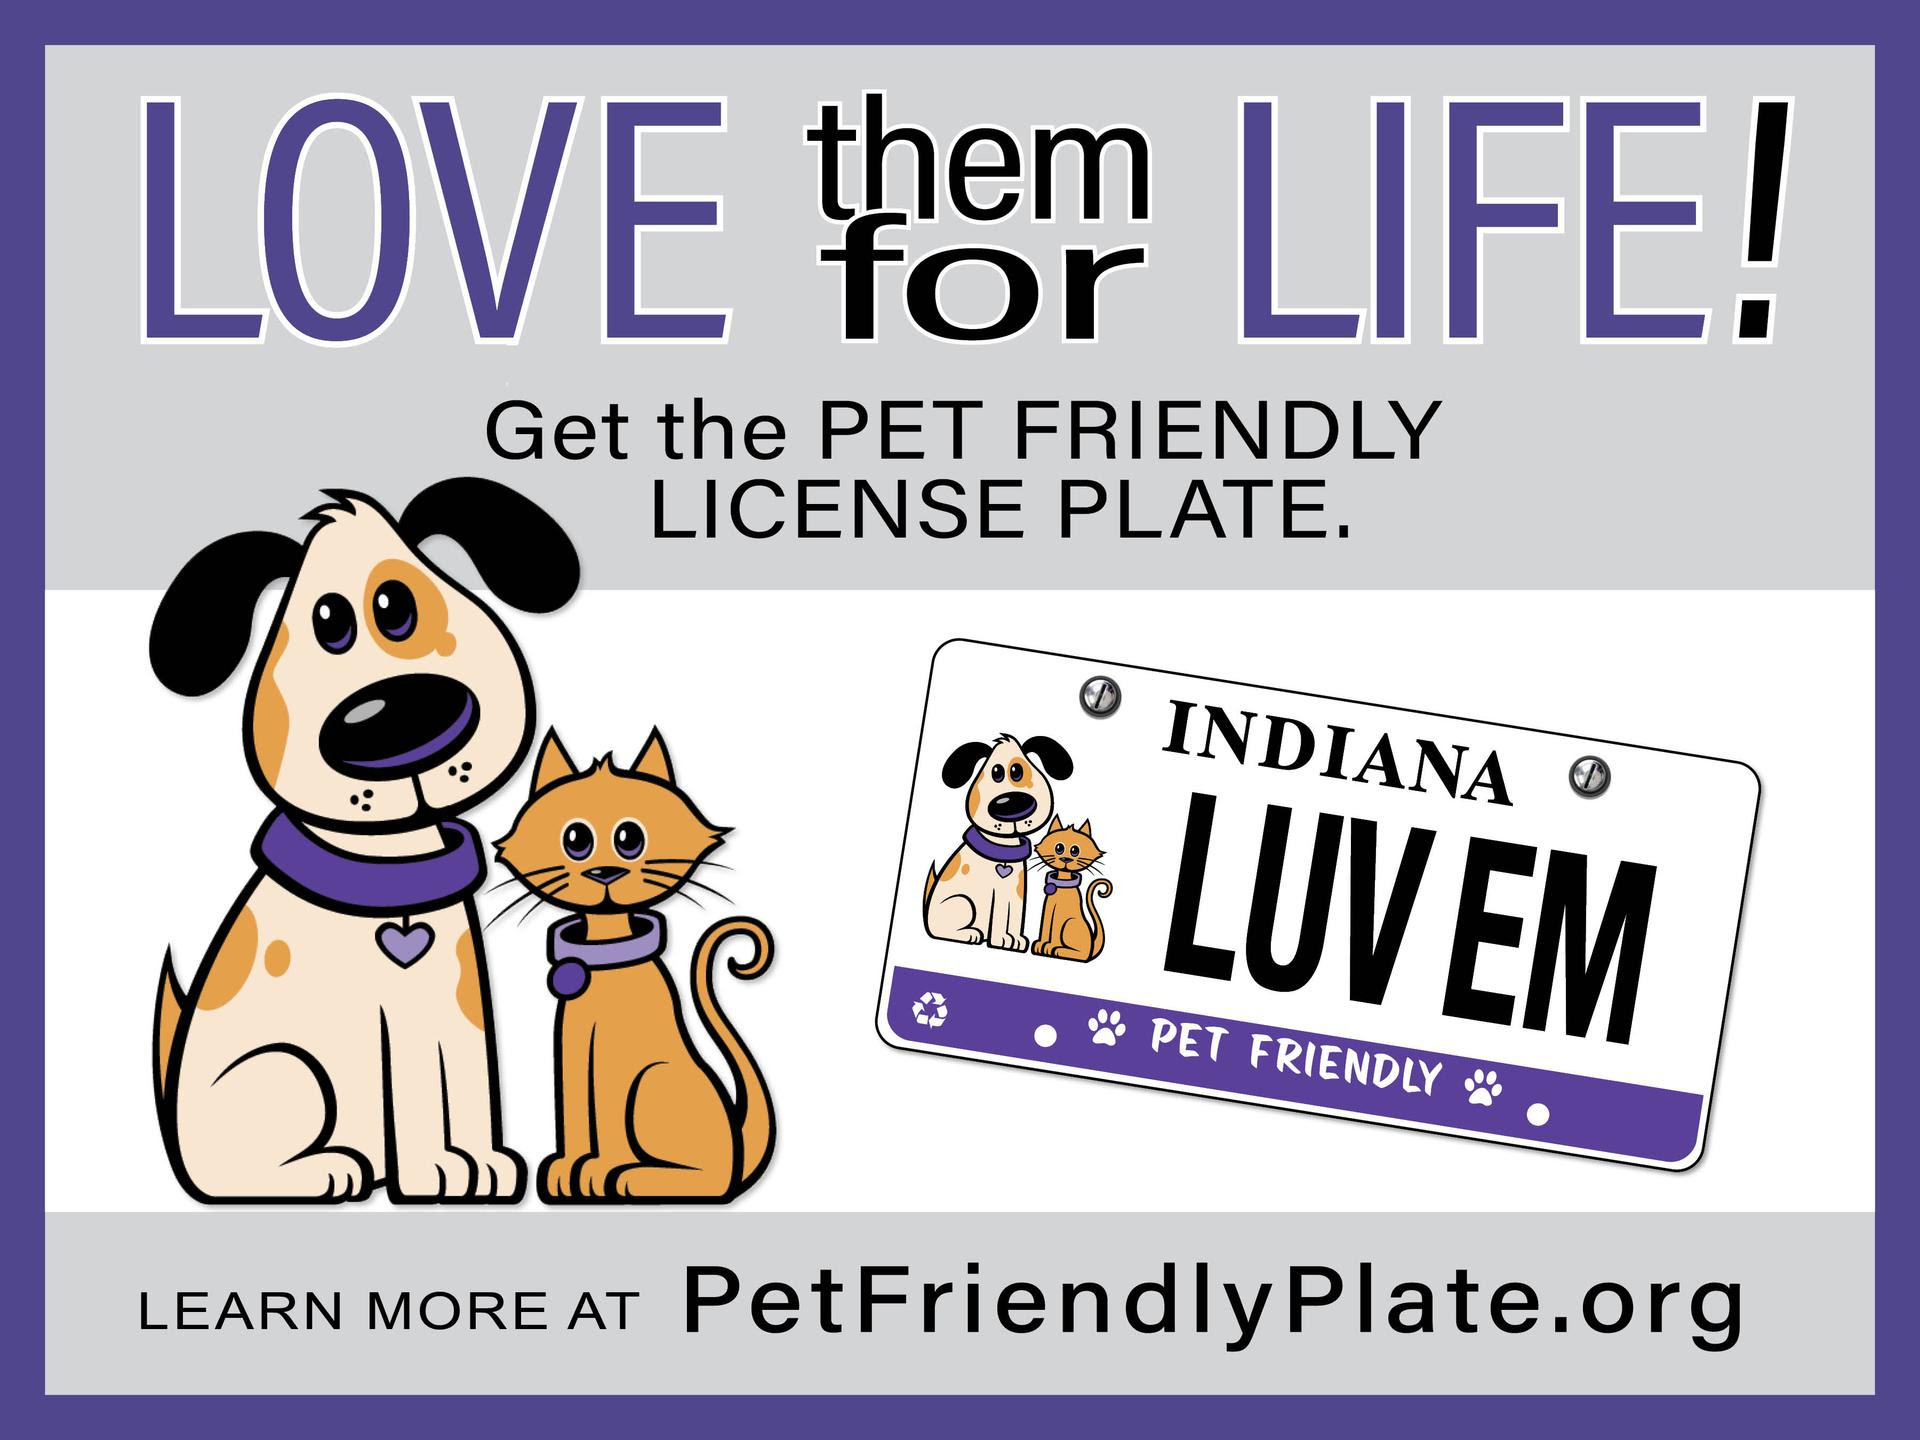 Indiana Humane Services, Pet Friendly license plate logo.